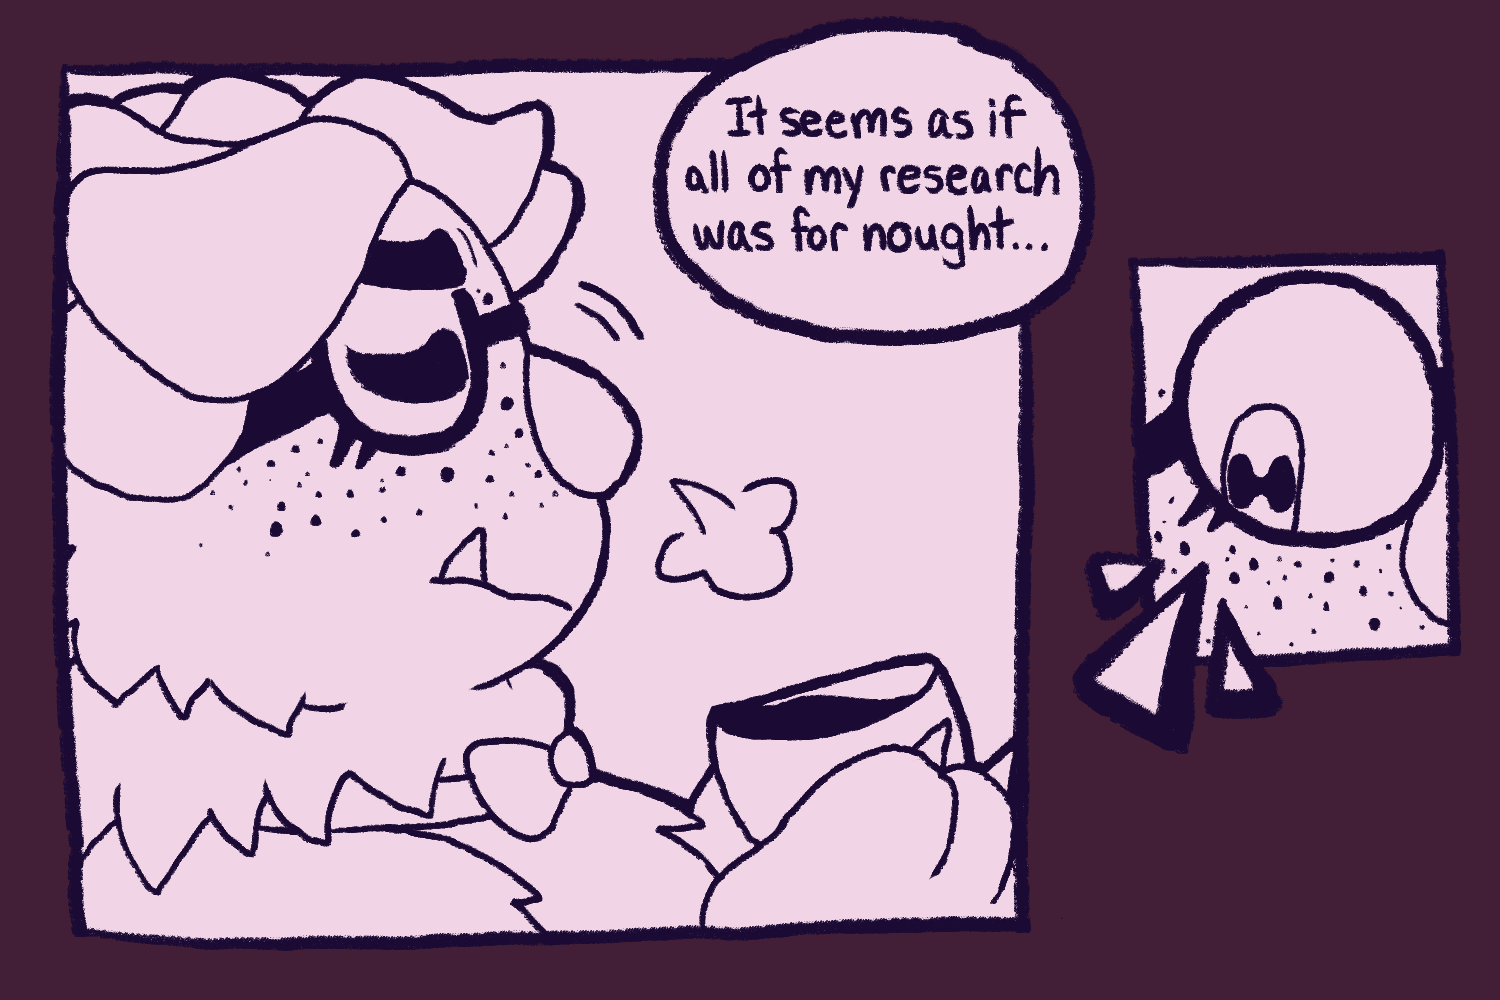 In one panel, Floofty holds their coffee, sighing, with text in a speech bubble saying, 'It seems as if all of my research was for nought...' A closeup of their eyes in the next panel indicates them noticing something.